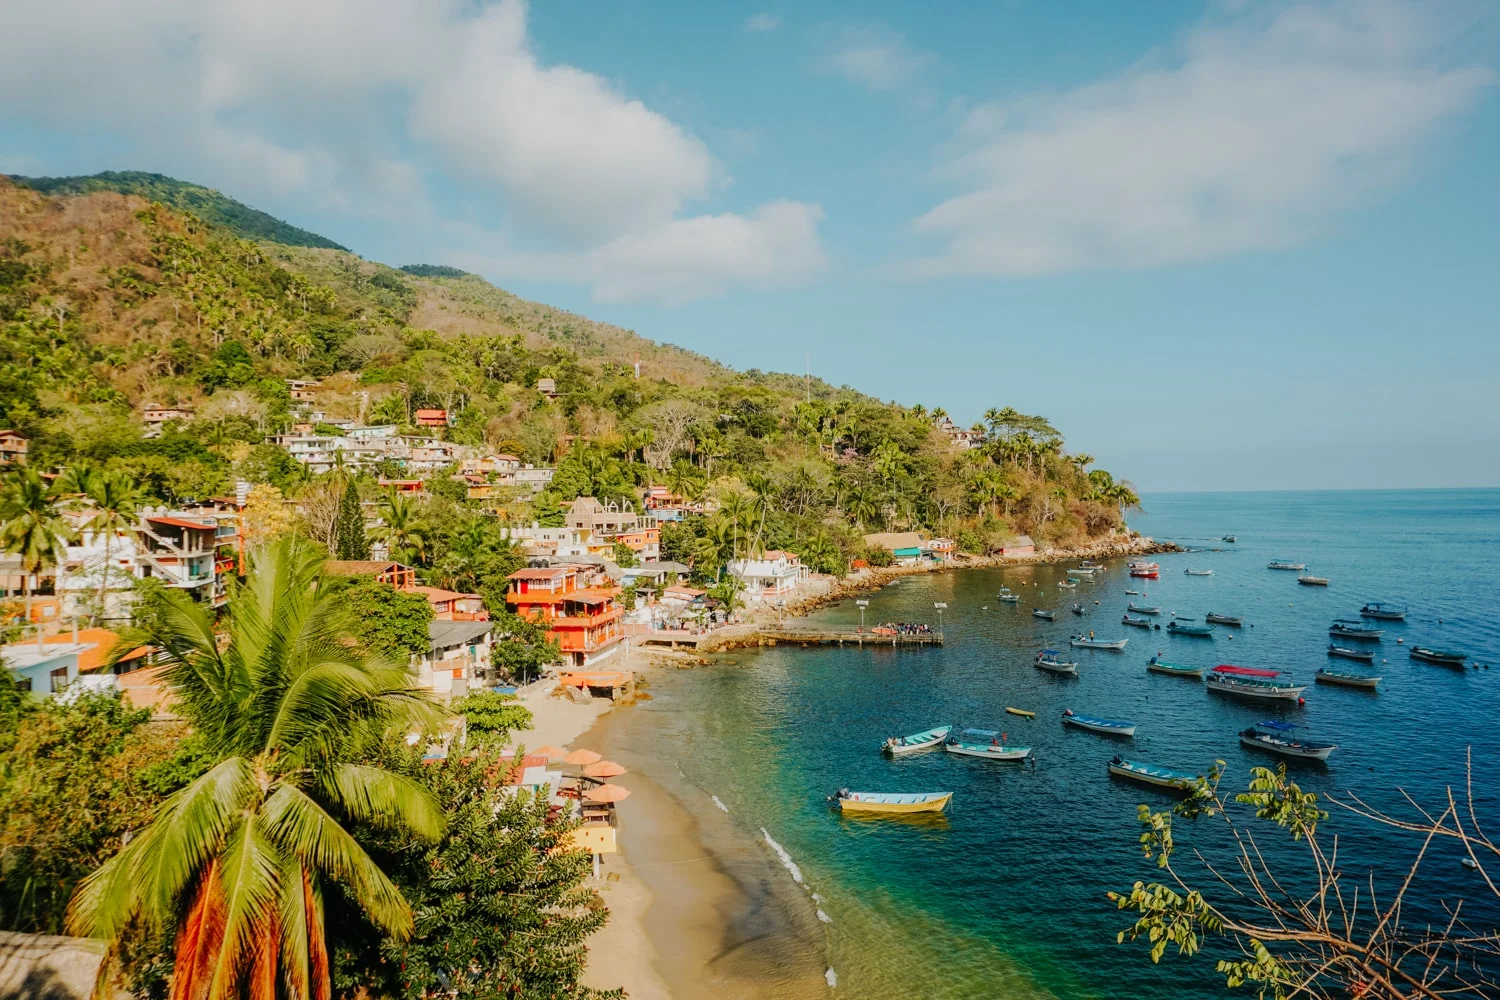 Get into one of the most beautiful beaches of Banderas Bay.